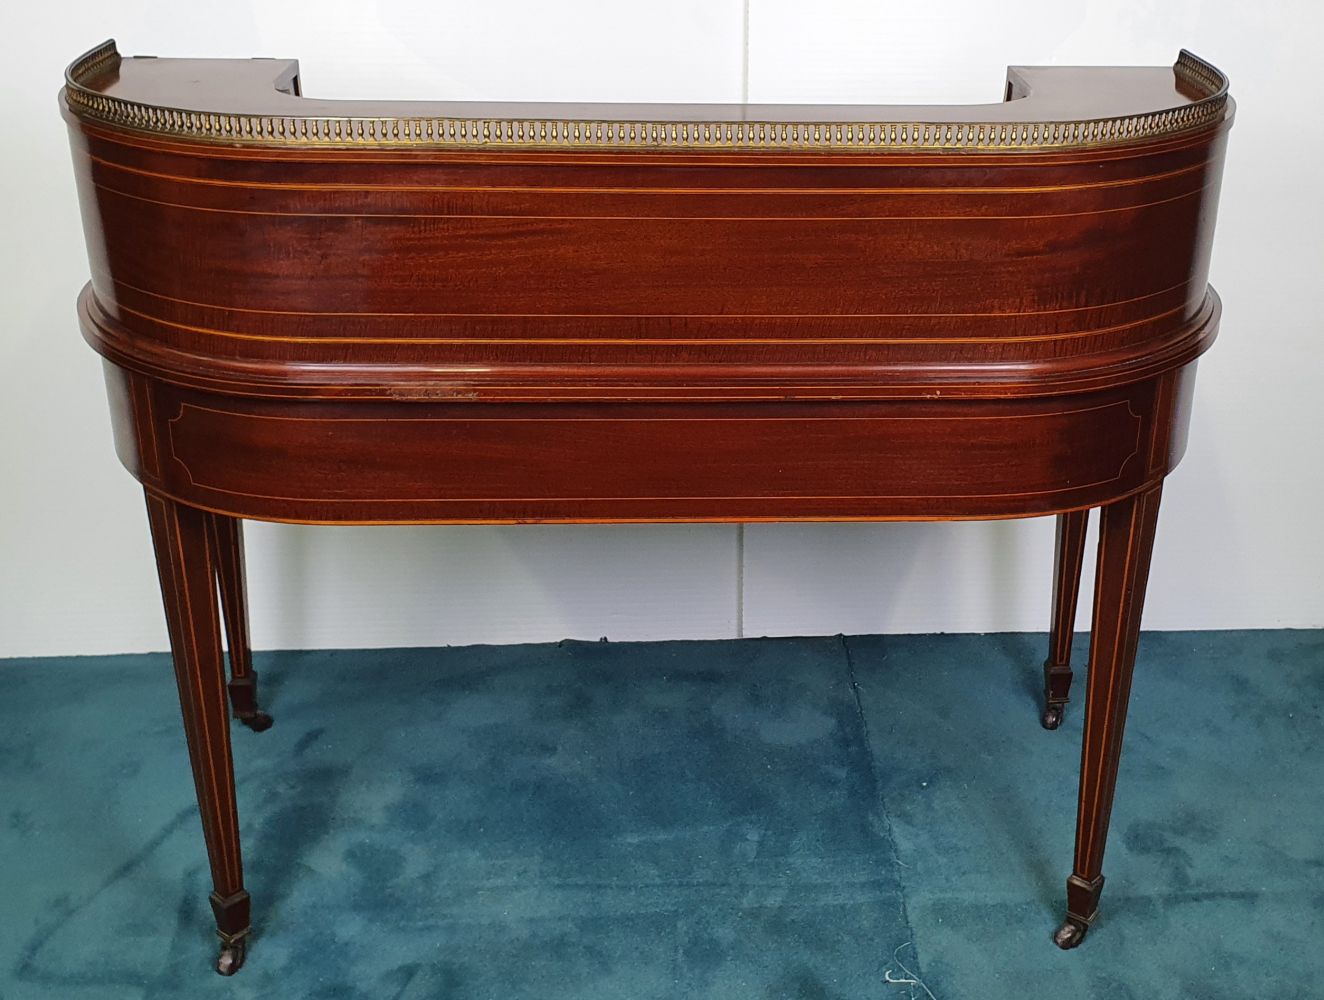 A RARE VERY GOOD QUALITY EDWARDIAN INLAID MAHOGANY CARLTON HOUSE DESK, with raised brass gallery - Image 7 of 7